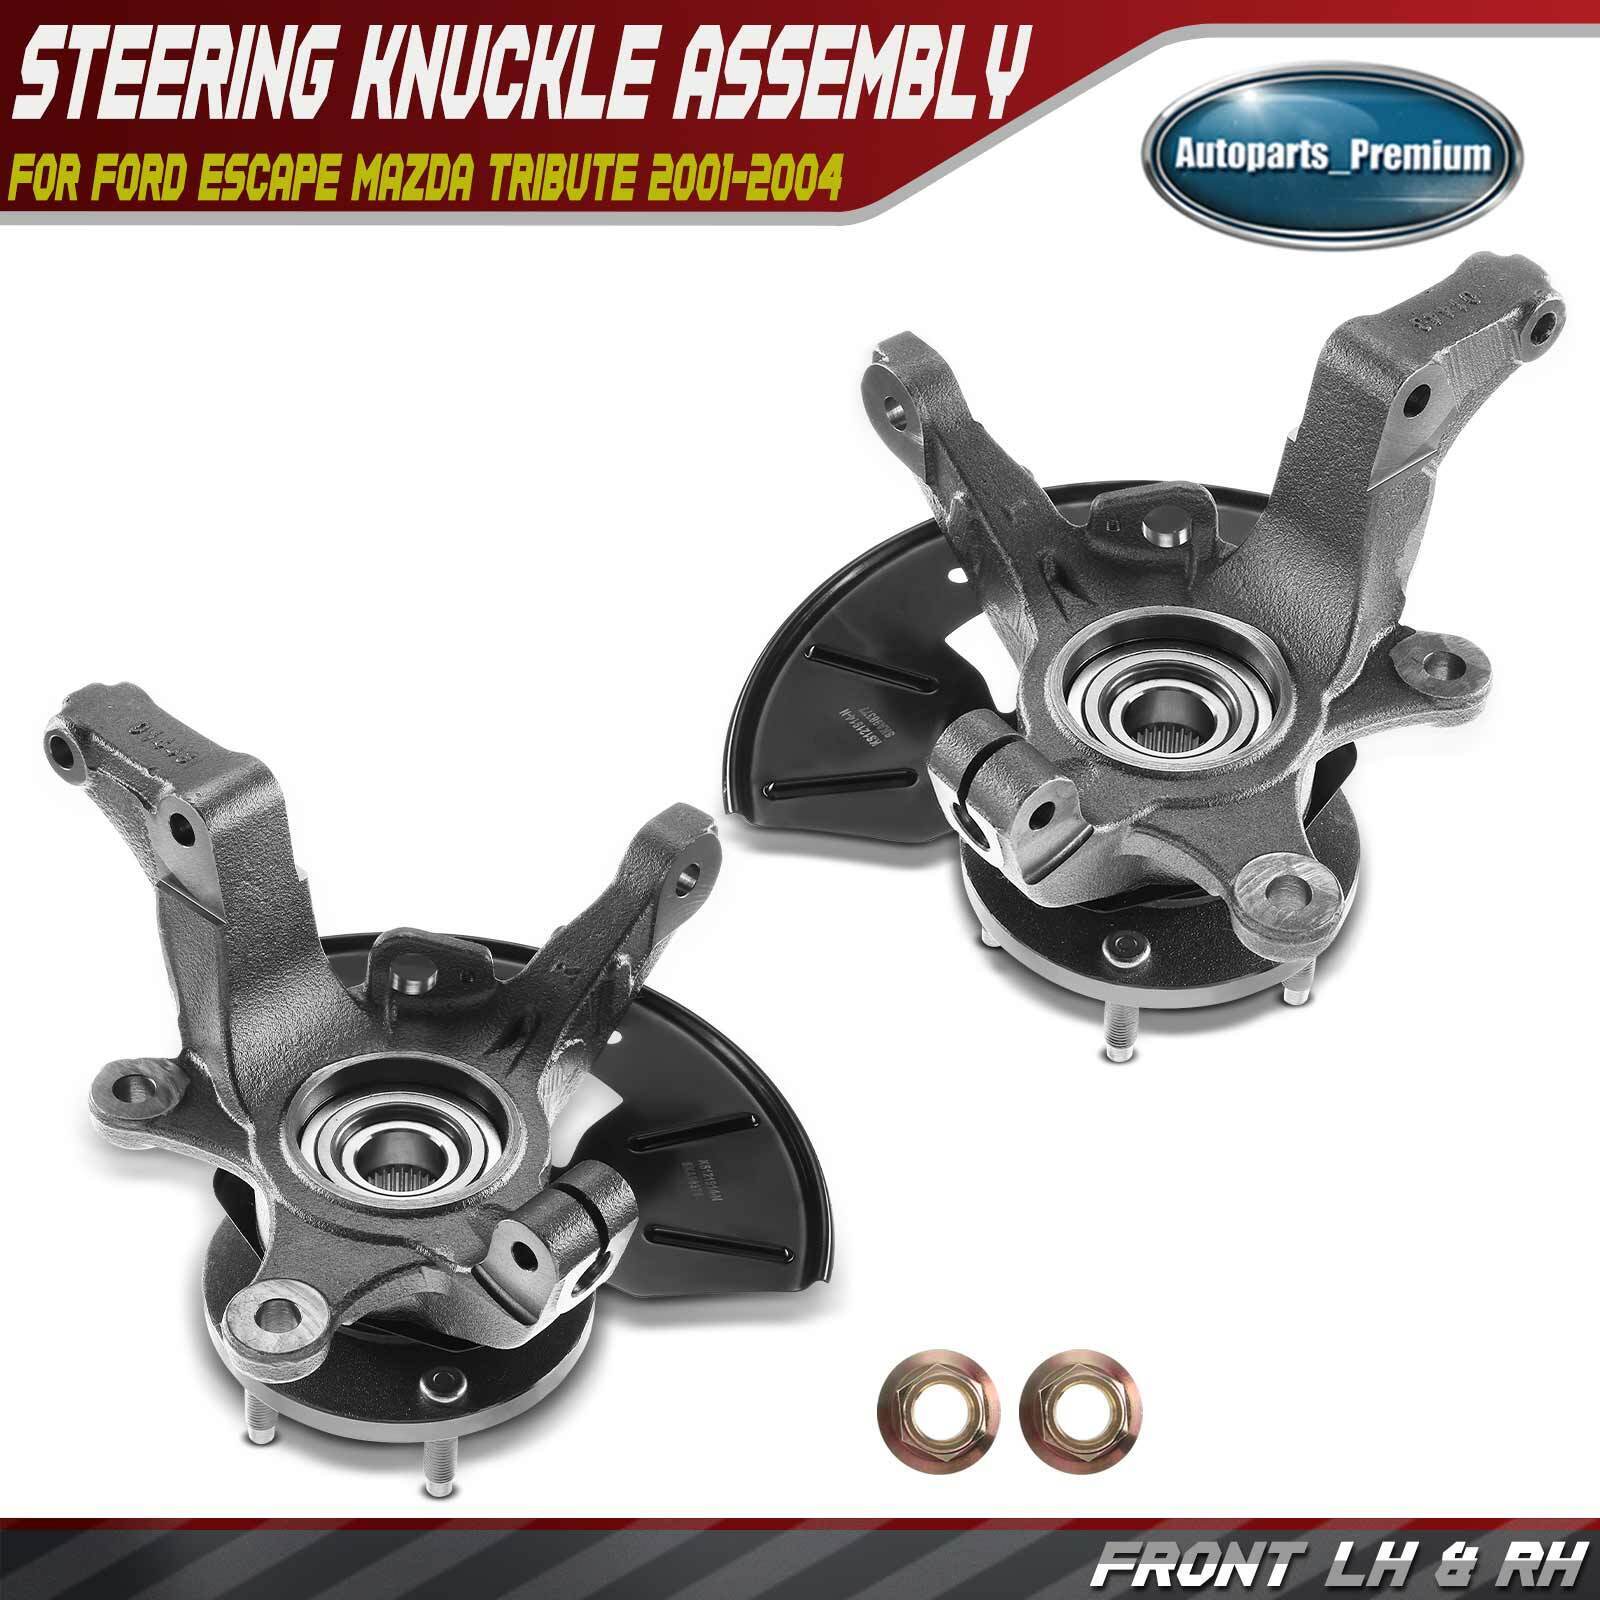 2x Front LH &RH Steering Knuckle & Wheel Hub Bearing Assembly for Ford Escape